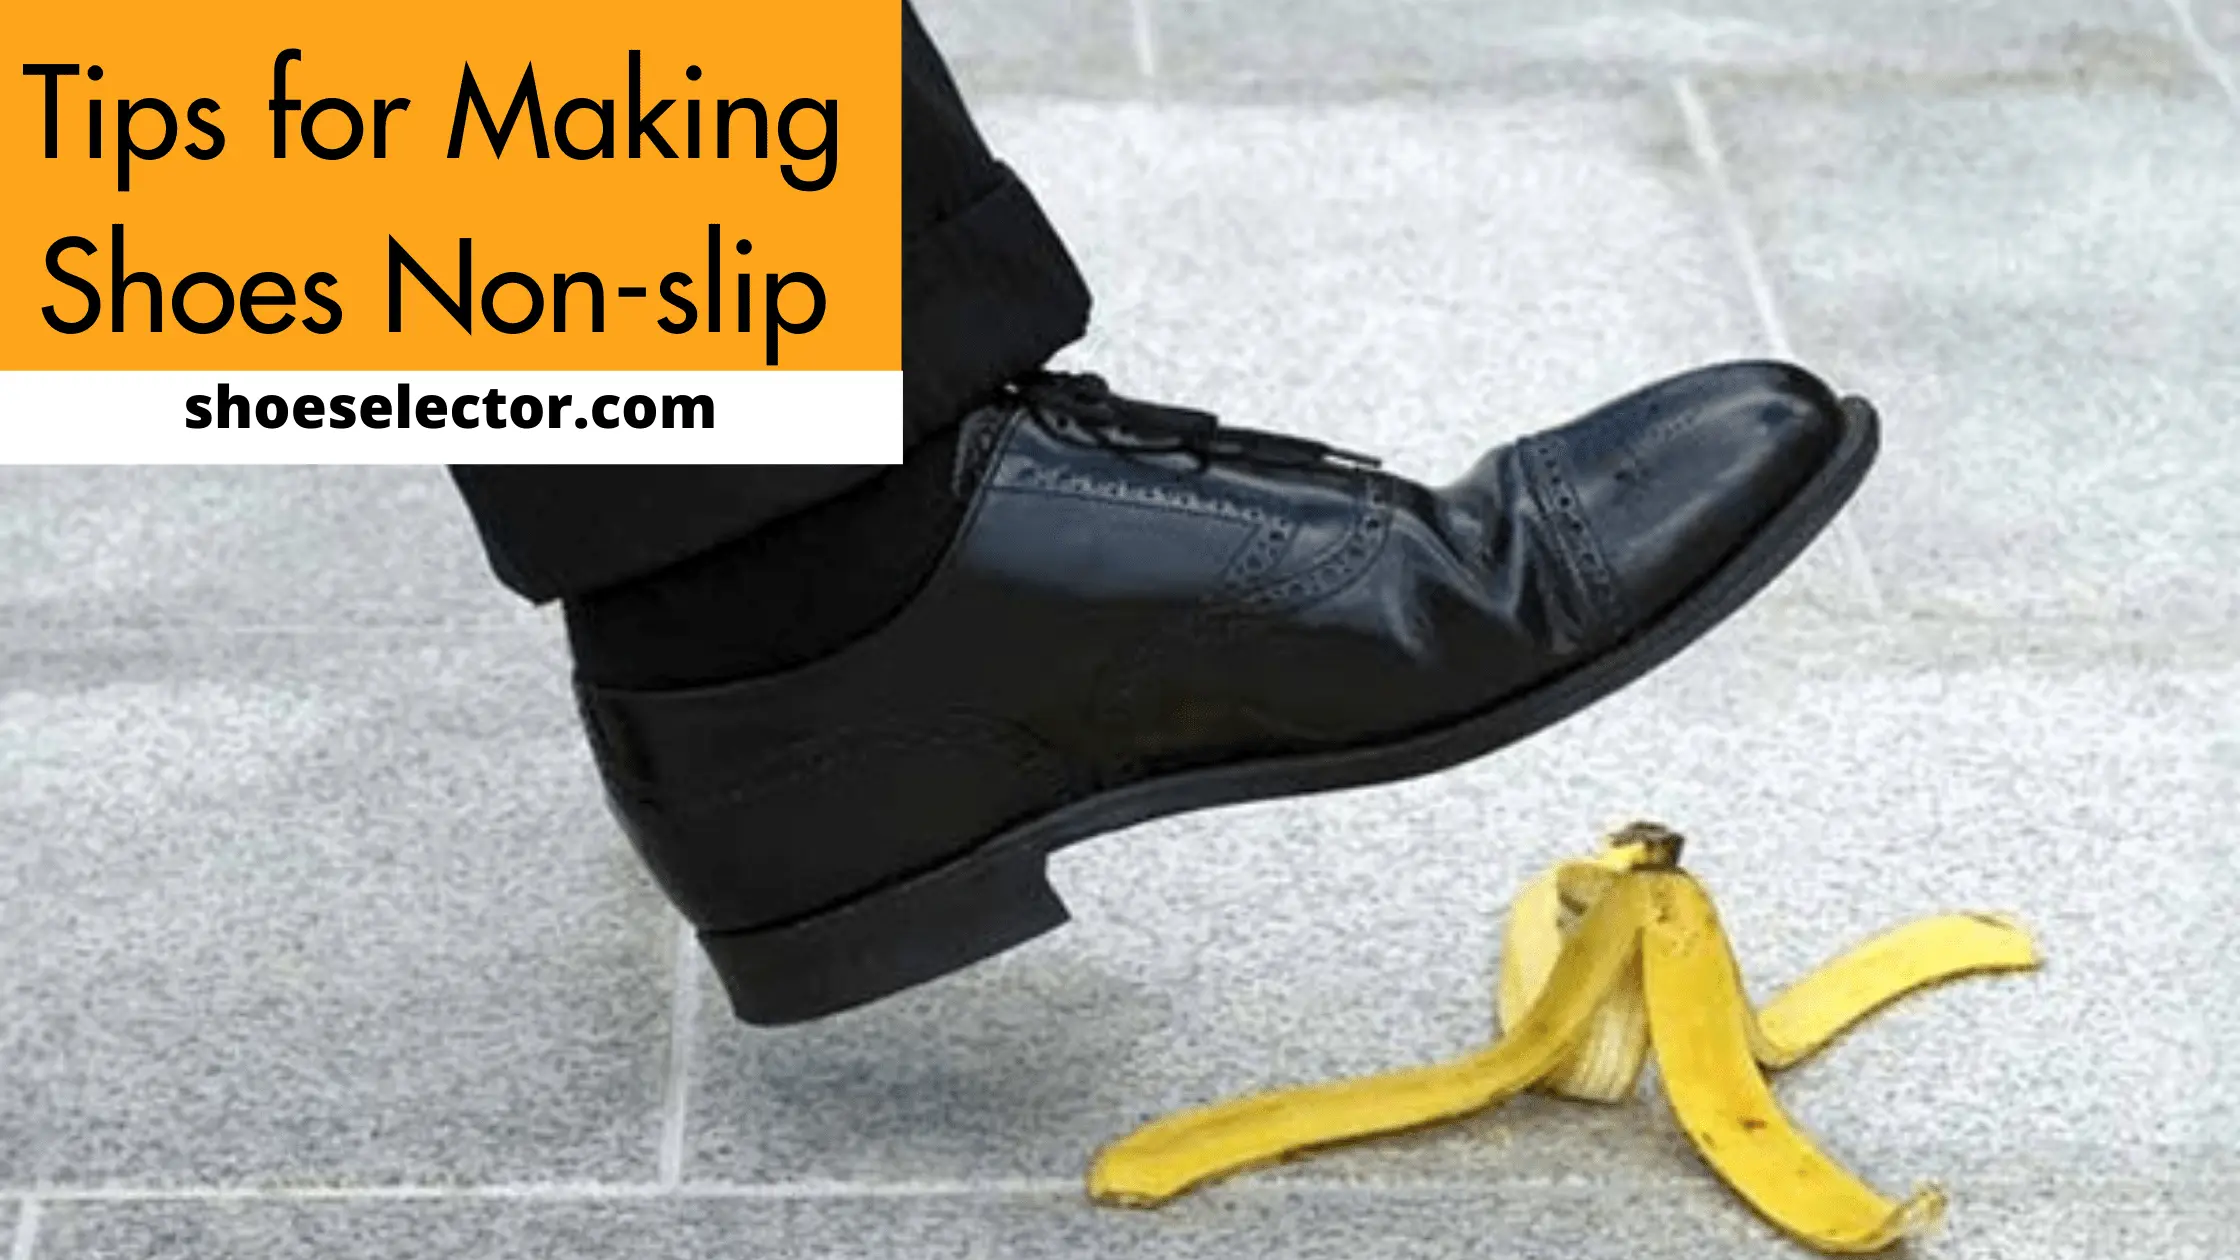 Tips for Making Shoes Non-slip